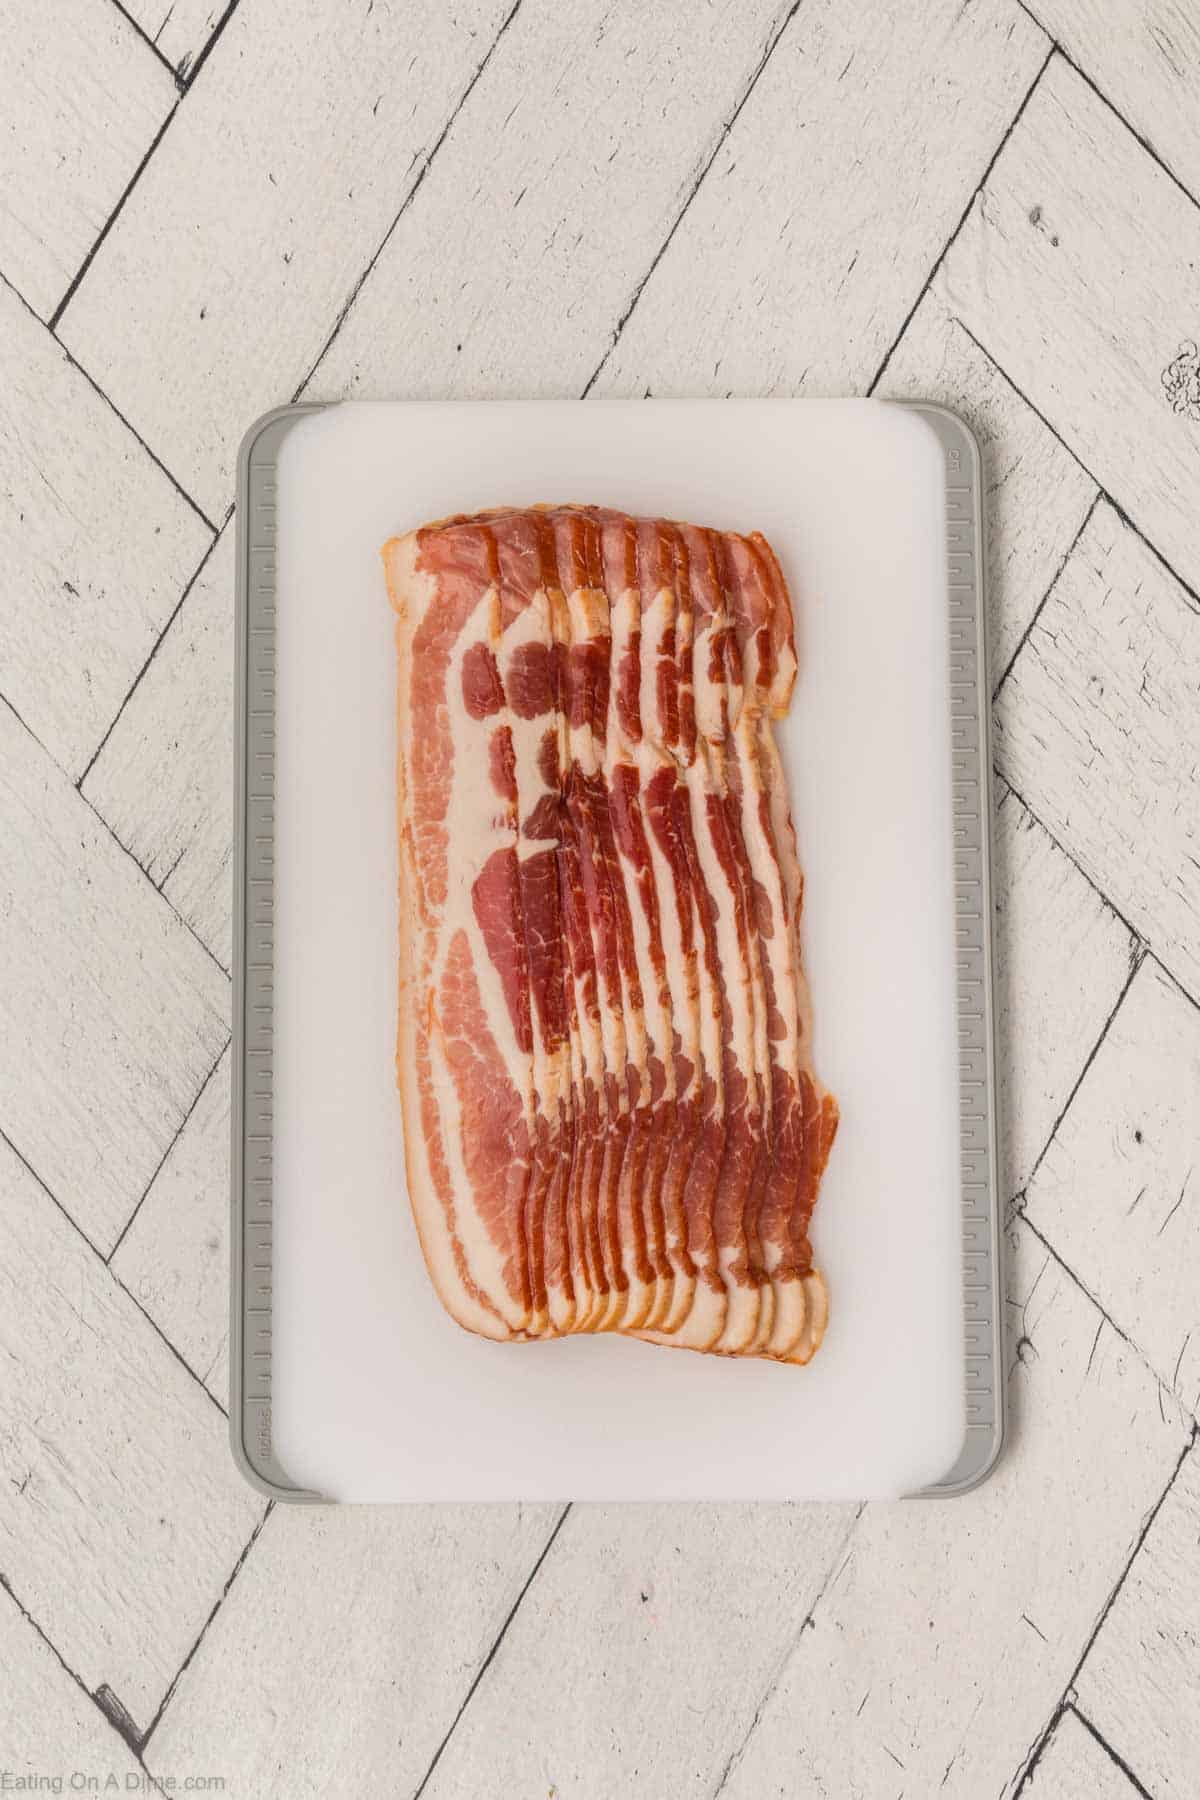 Strips of uncooked bacon